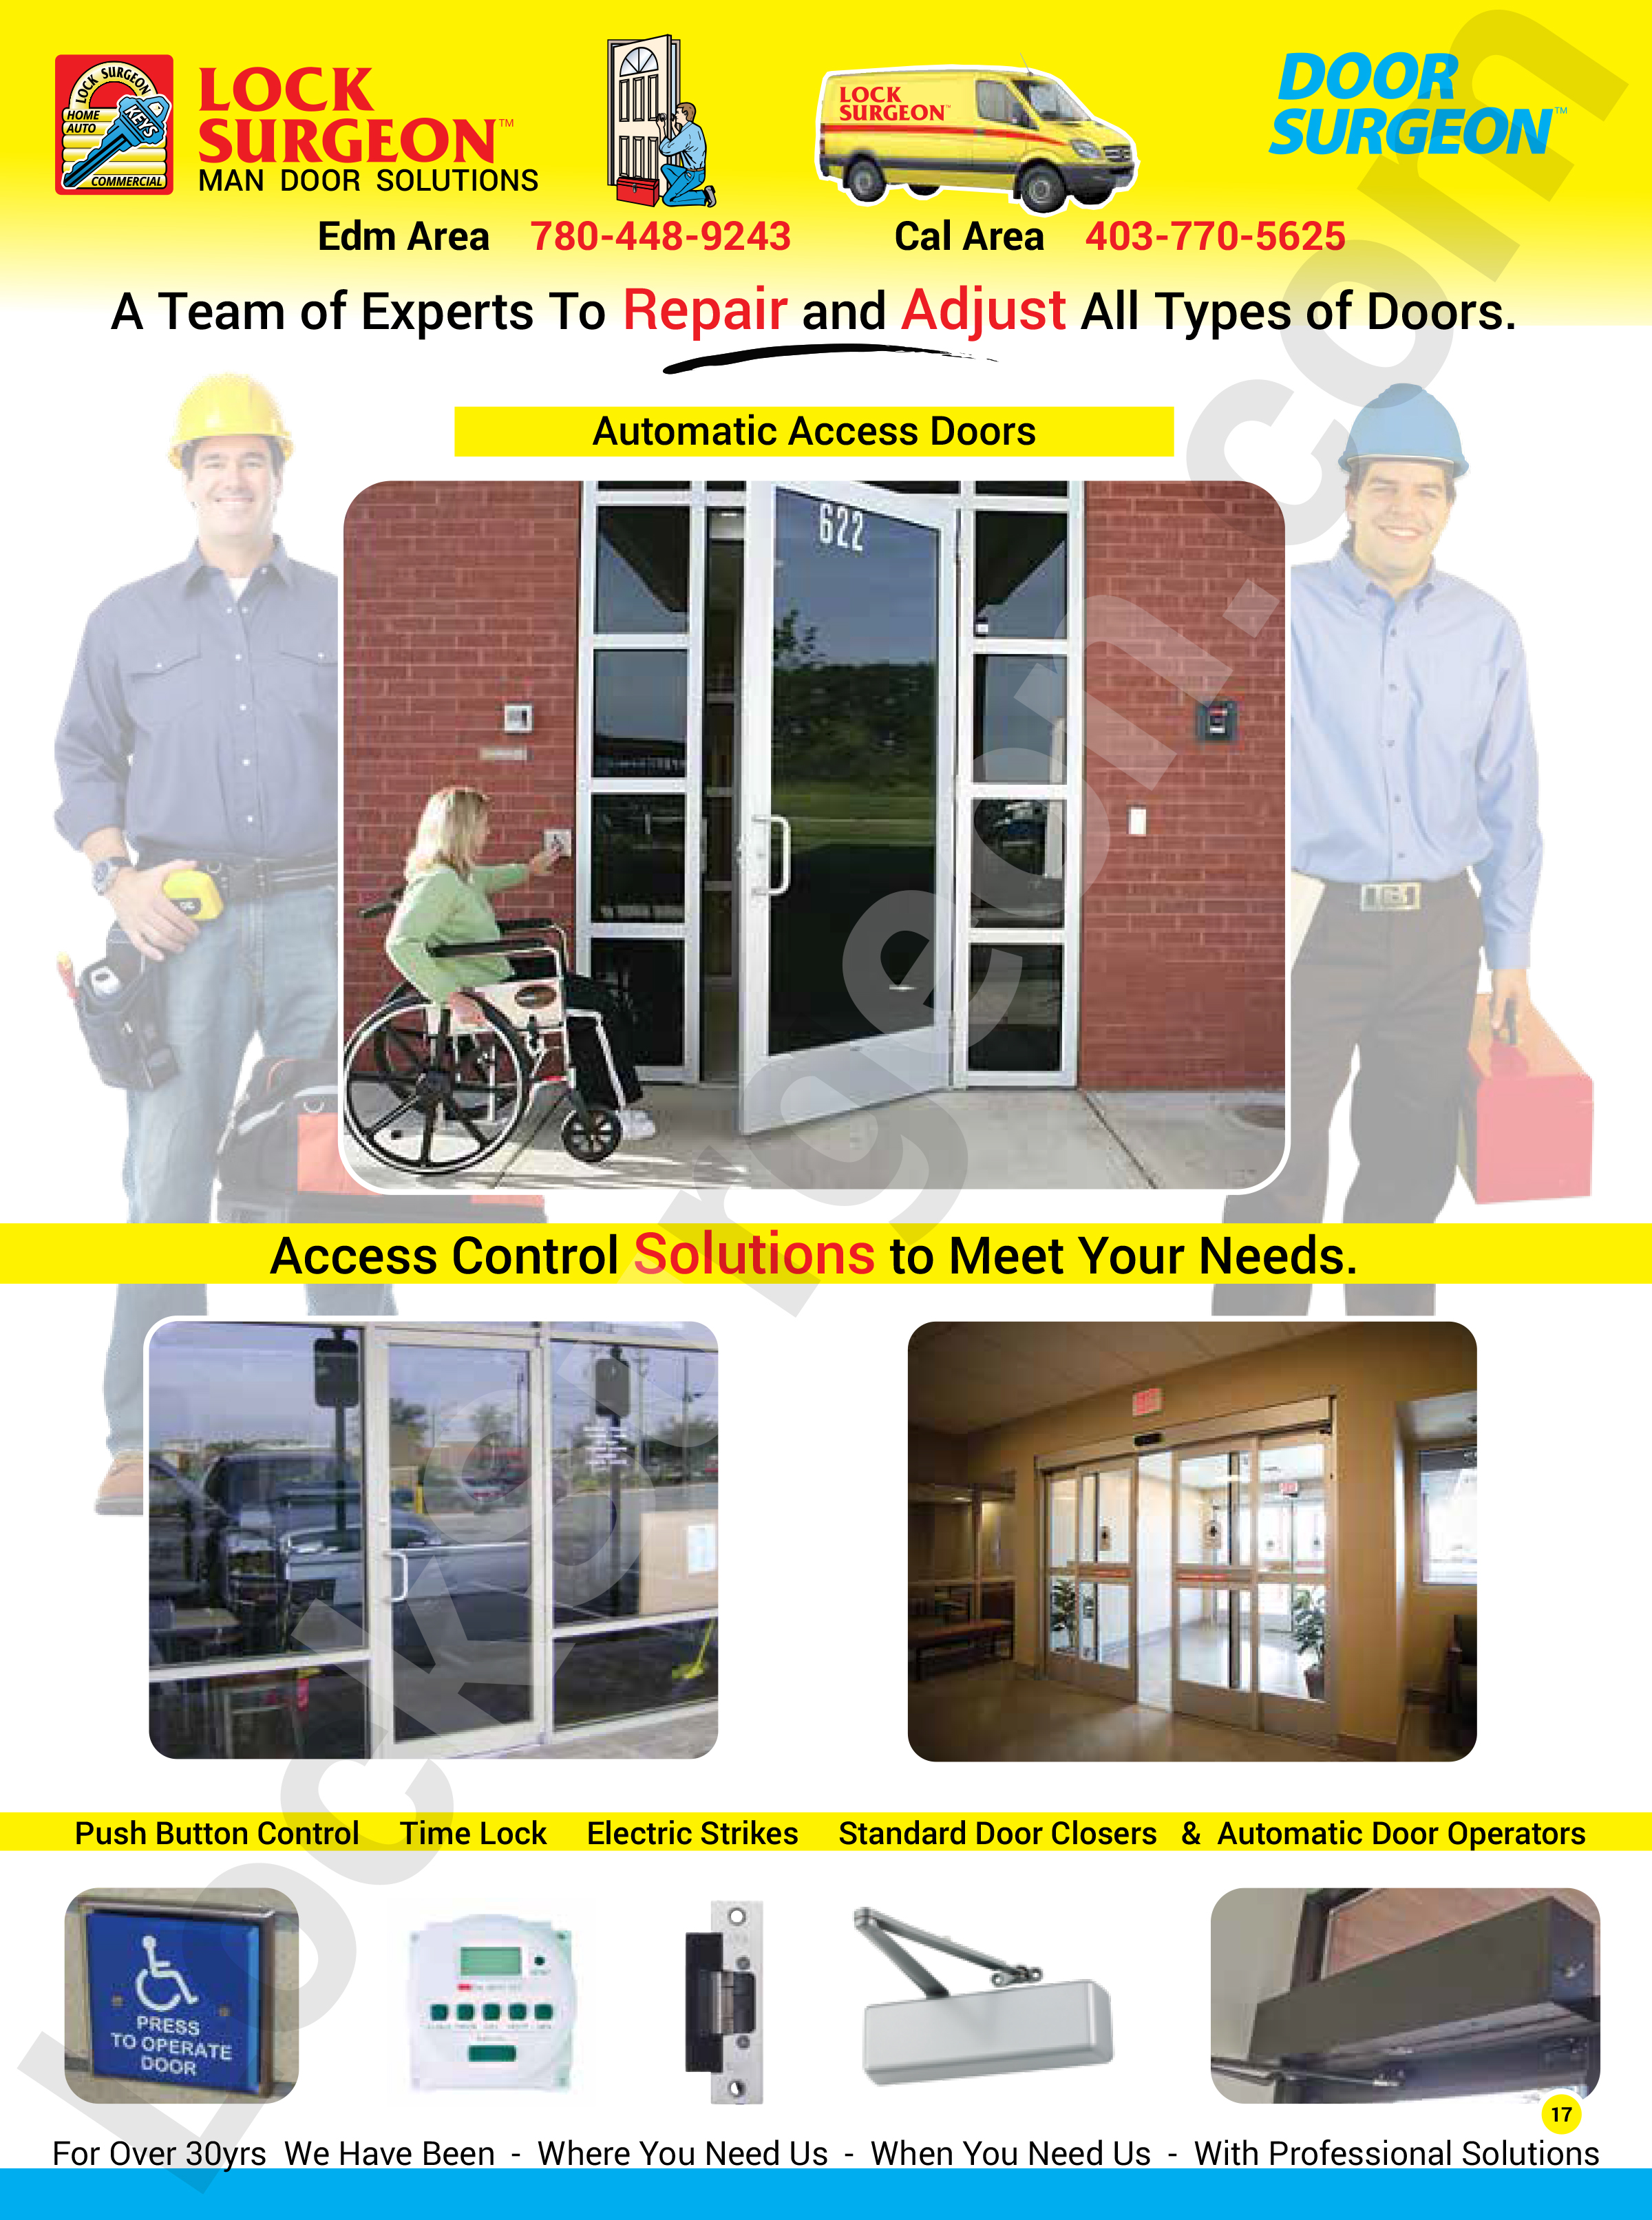 Automatic access doors, push-button control, time locks, electric strikes, standard door closers.